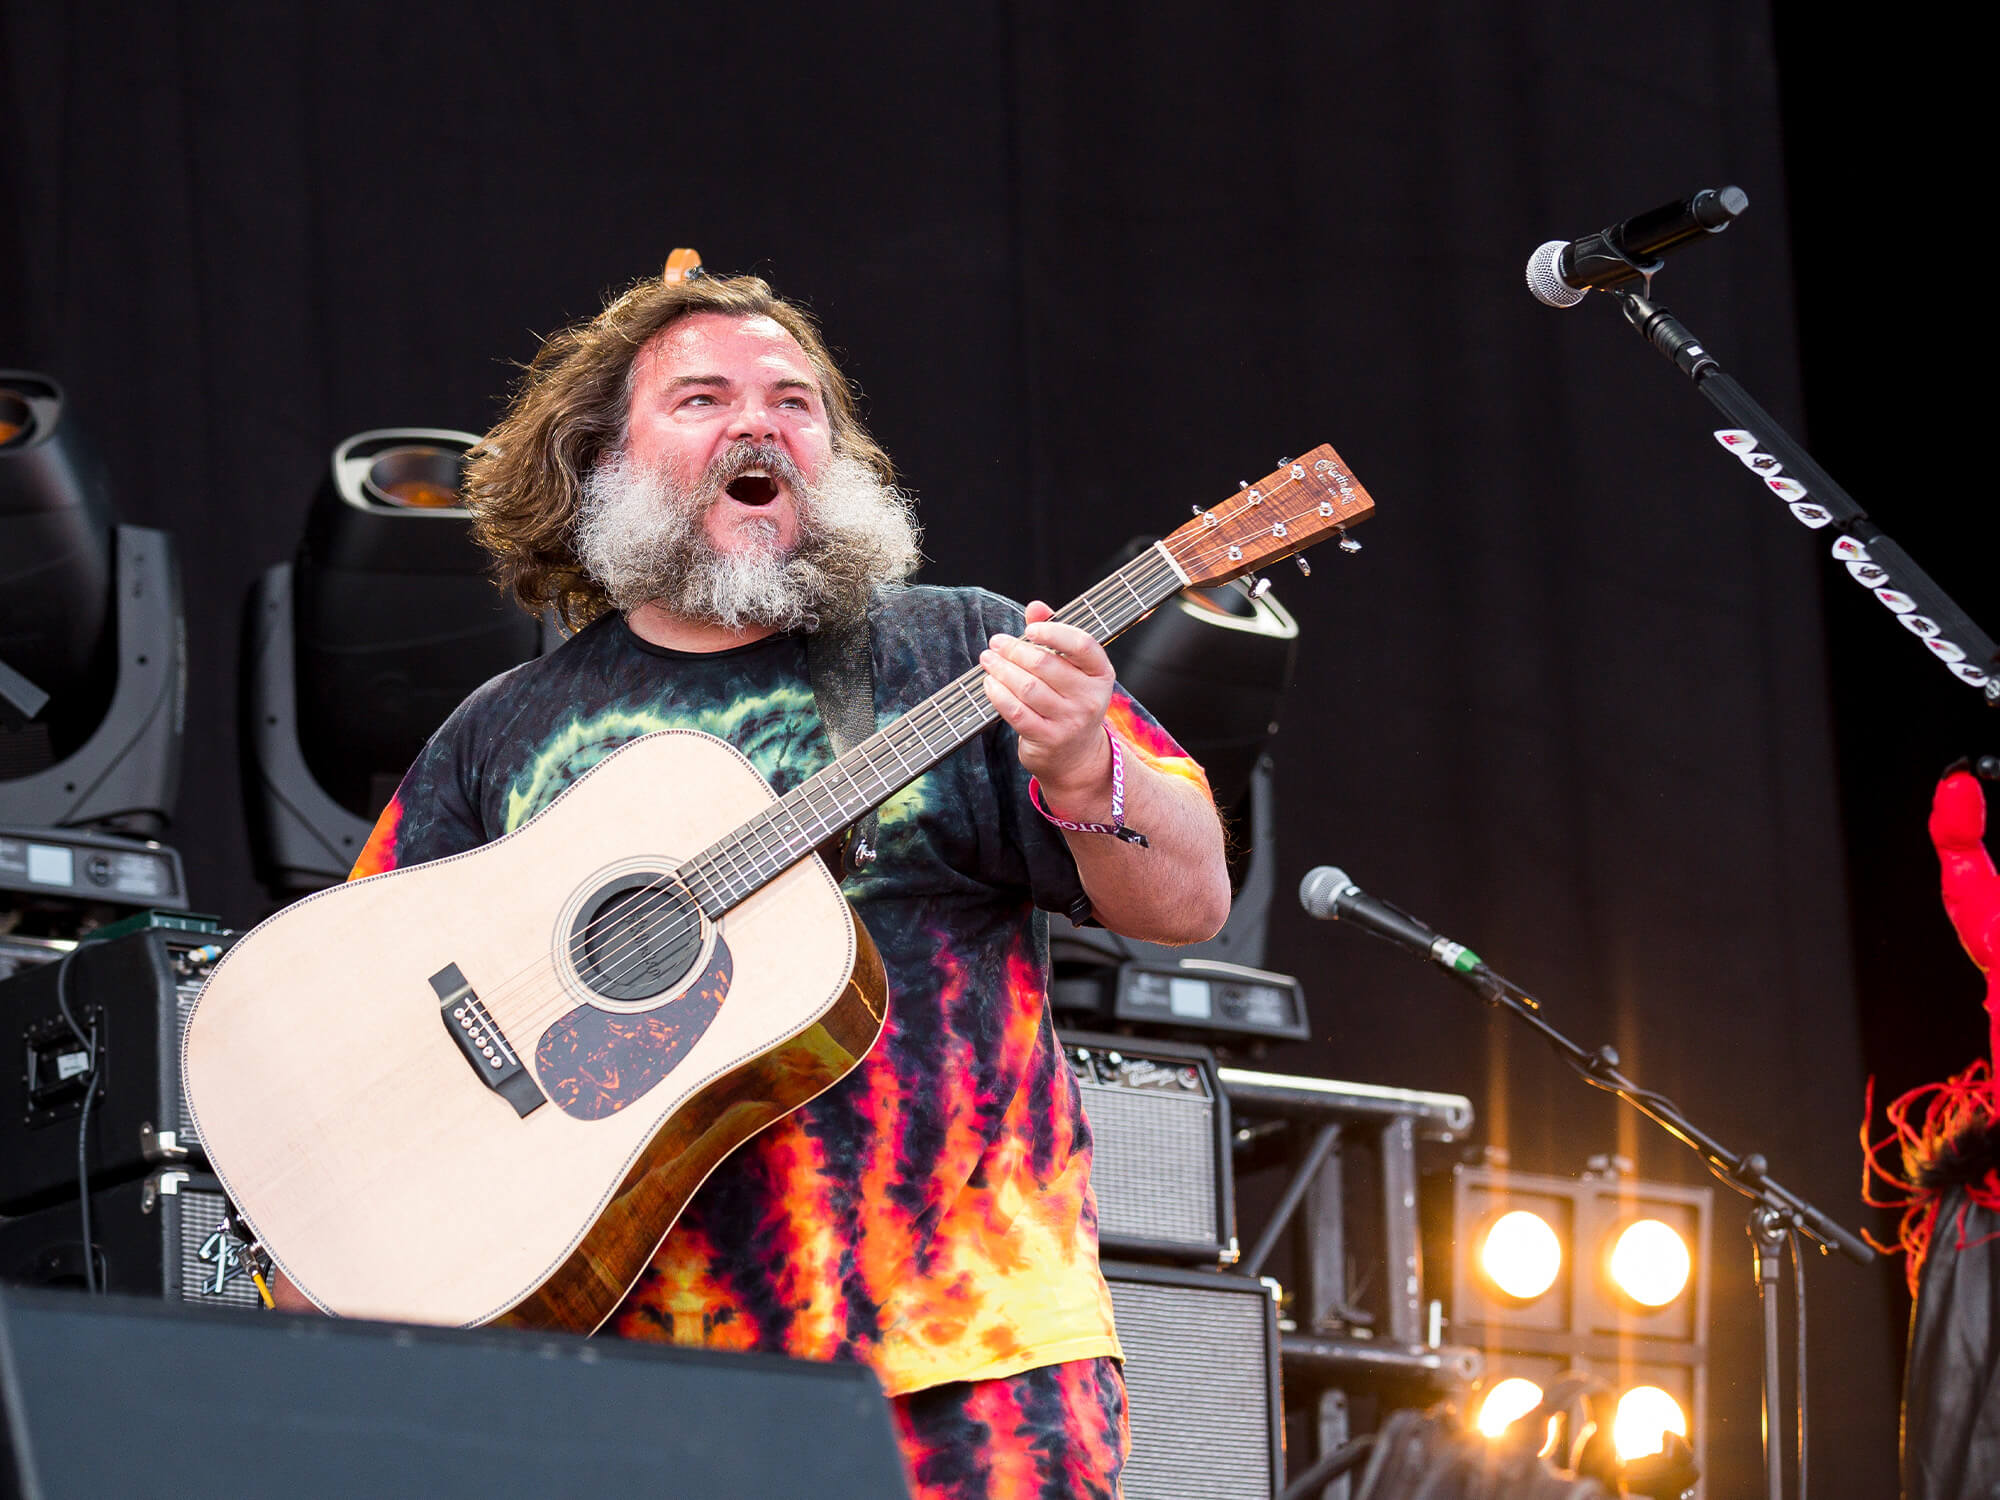 Jack Black on stage holding an acoustic guitar